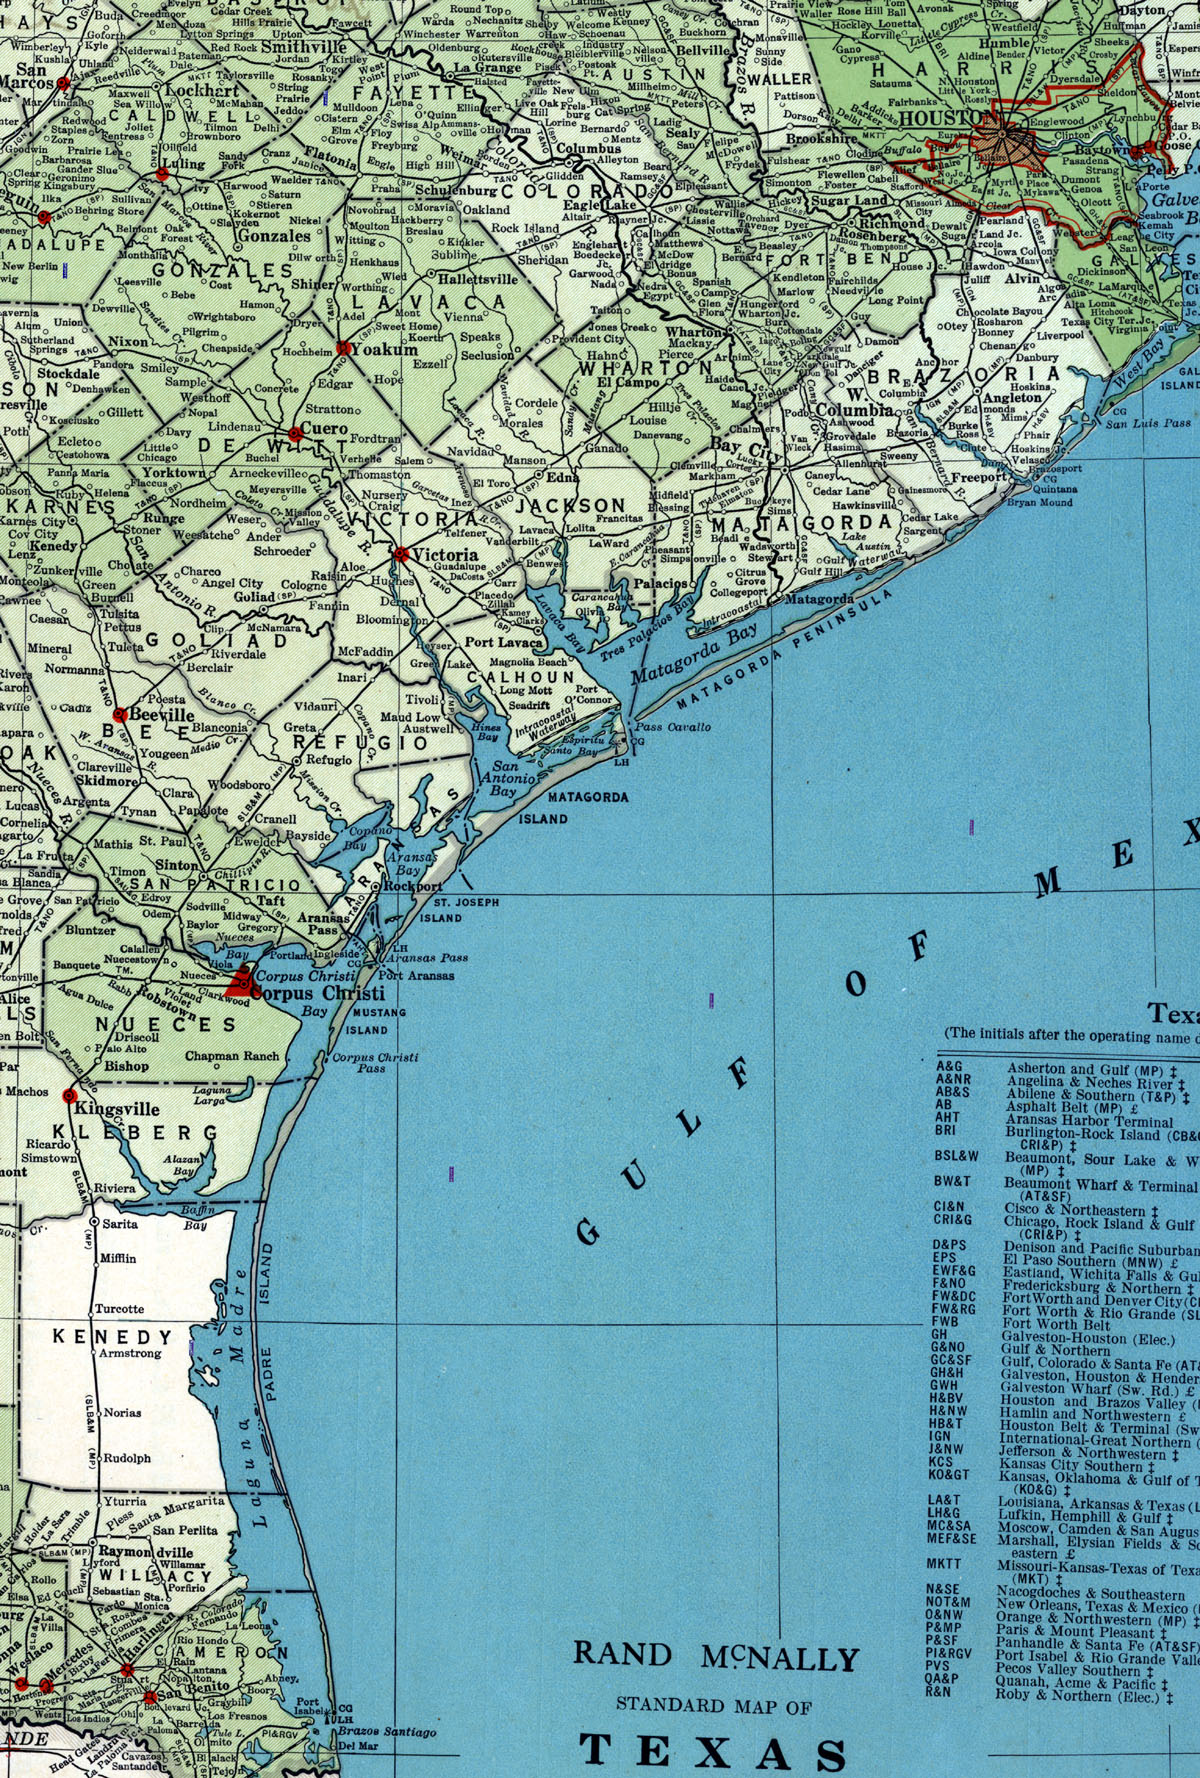 St. Louis, Brownsville & Mexico Railway Company (Tex.), map showing route along the Gulf Coast of Texas in 1937.